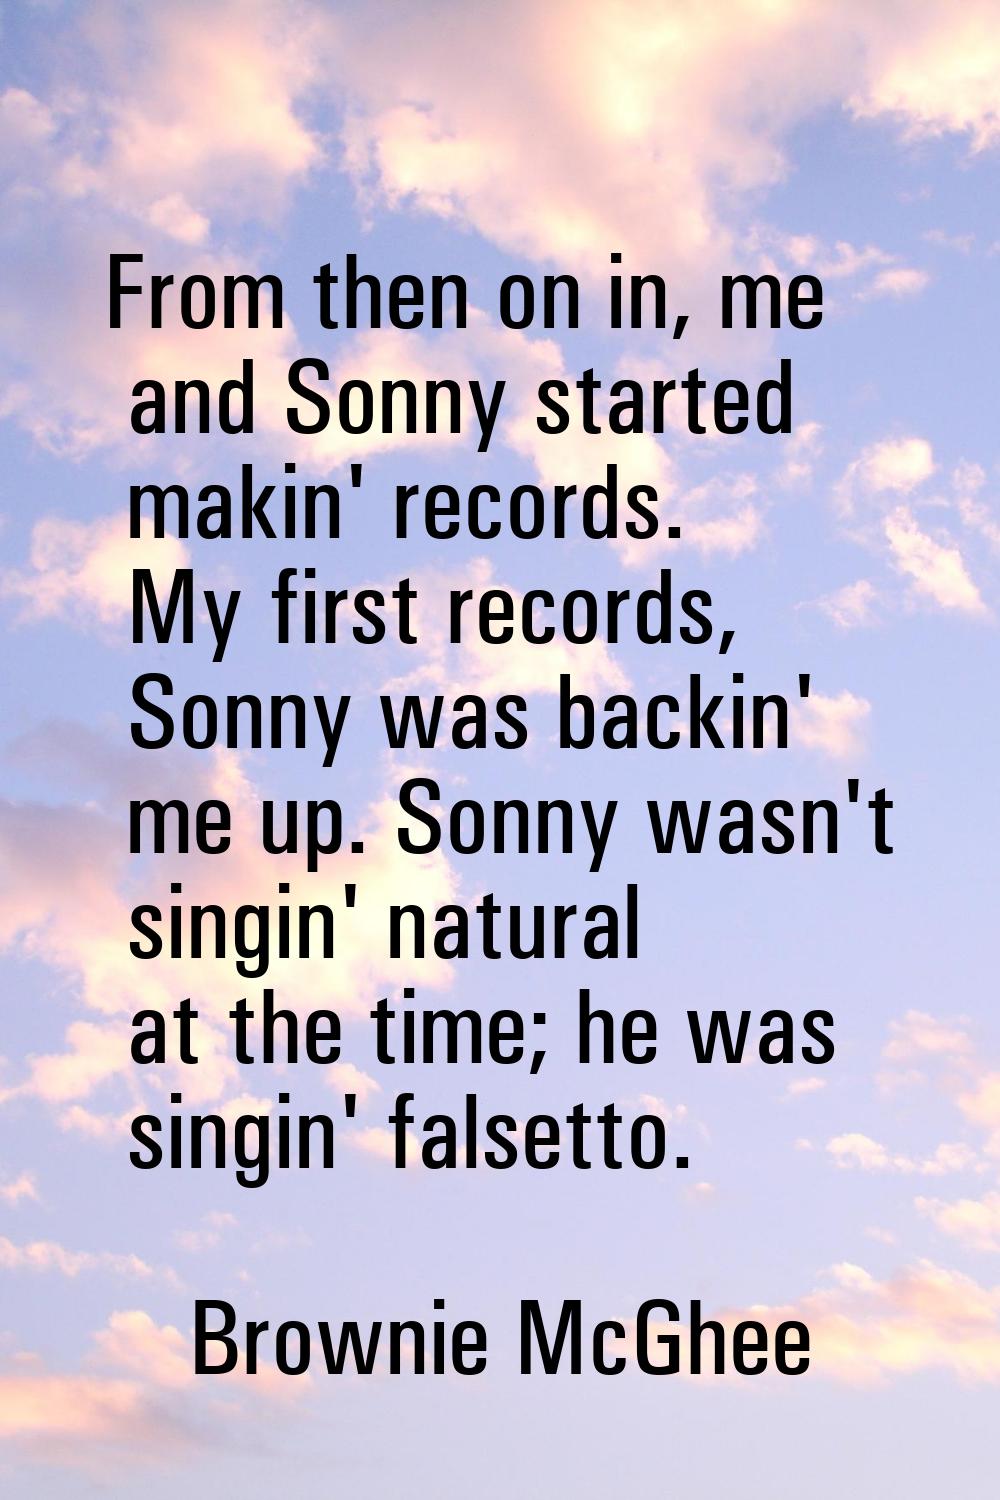 From then on in, me and Sonny started makin' records. My first records, Sonny was backin' me up. So